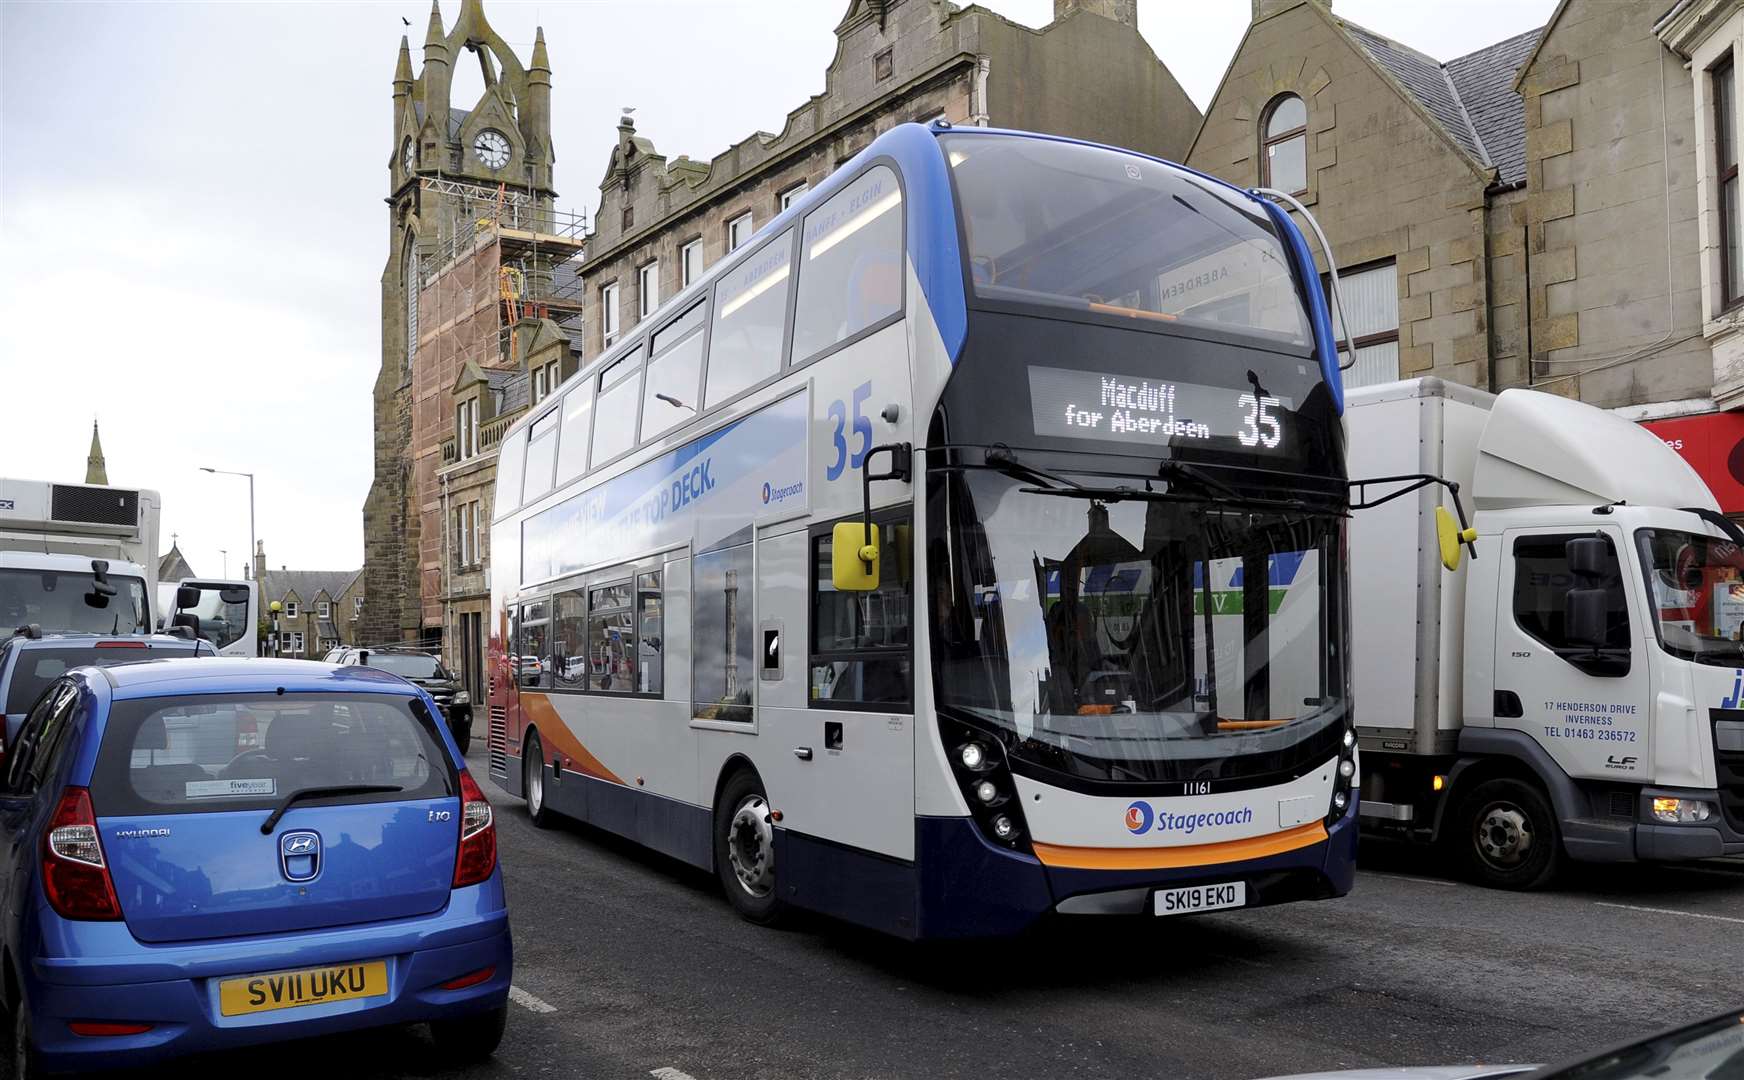 Affected services include a Sunday evening one on the 35 route to Aberdeen.